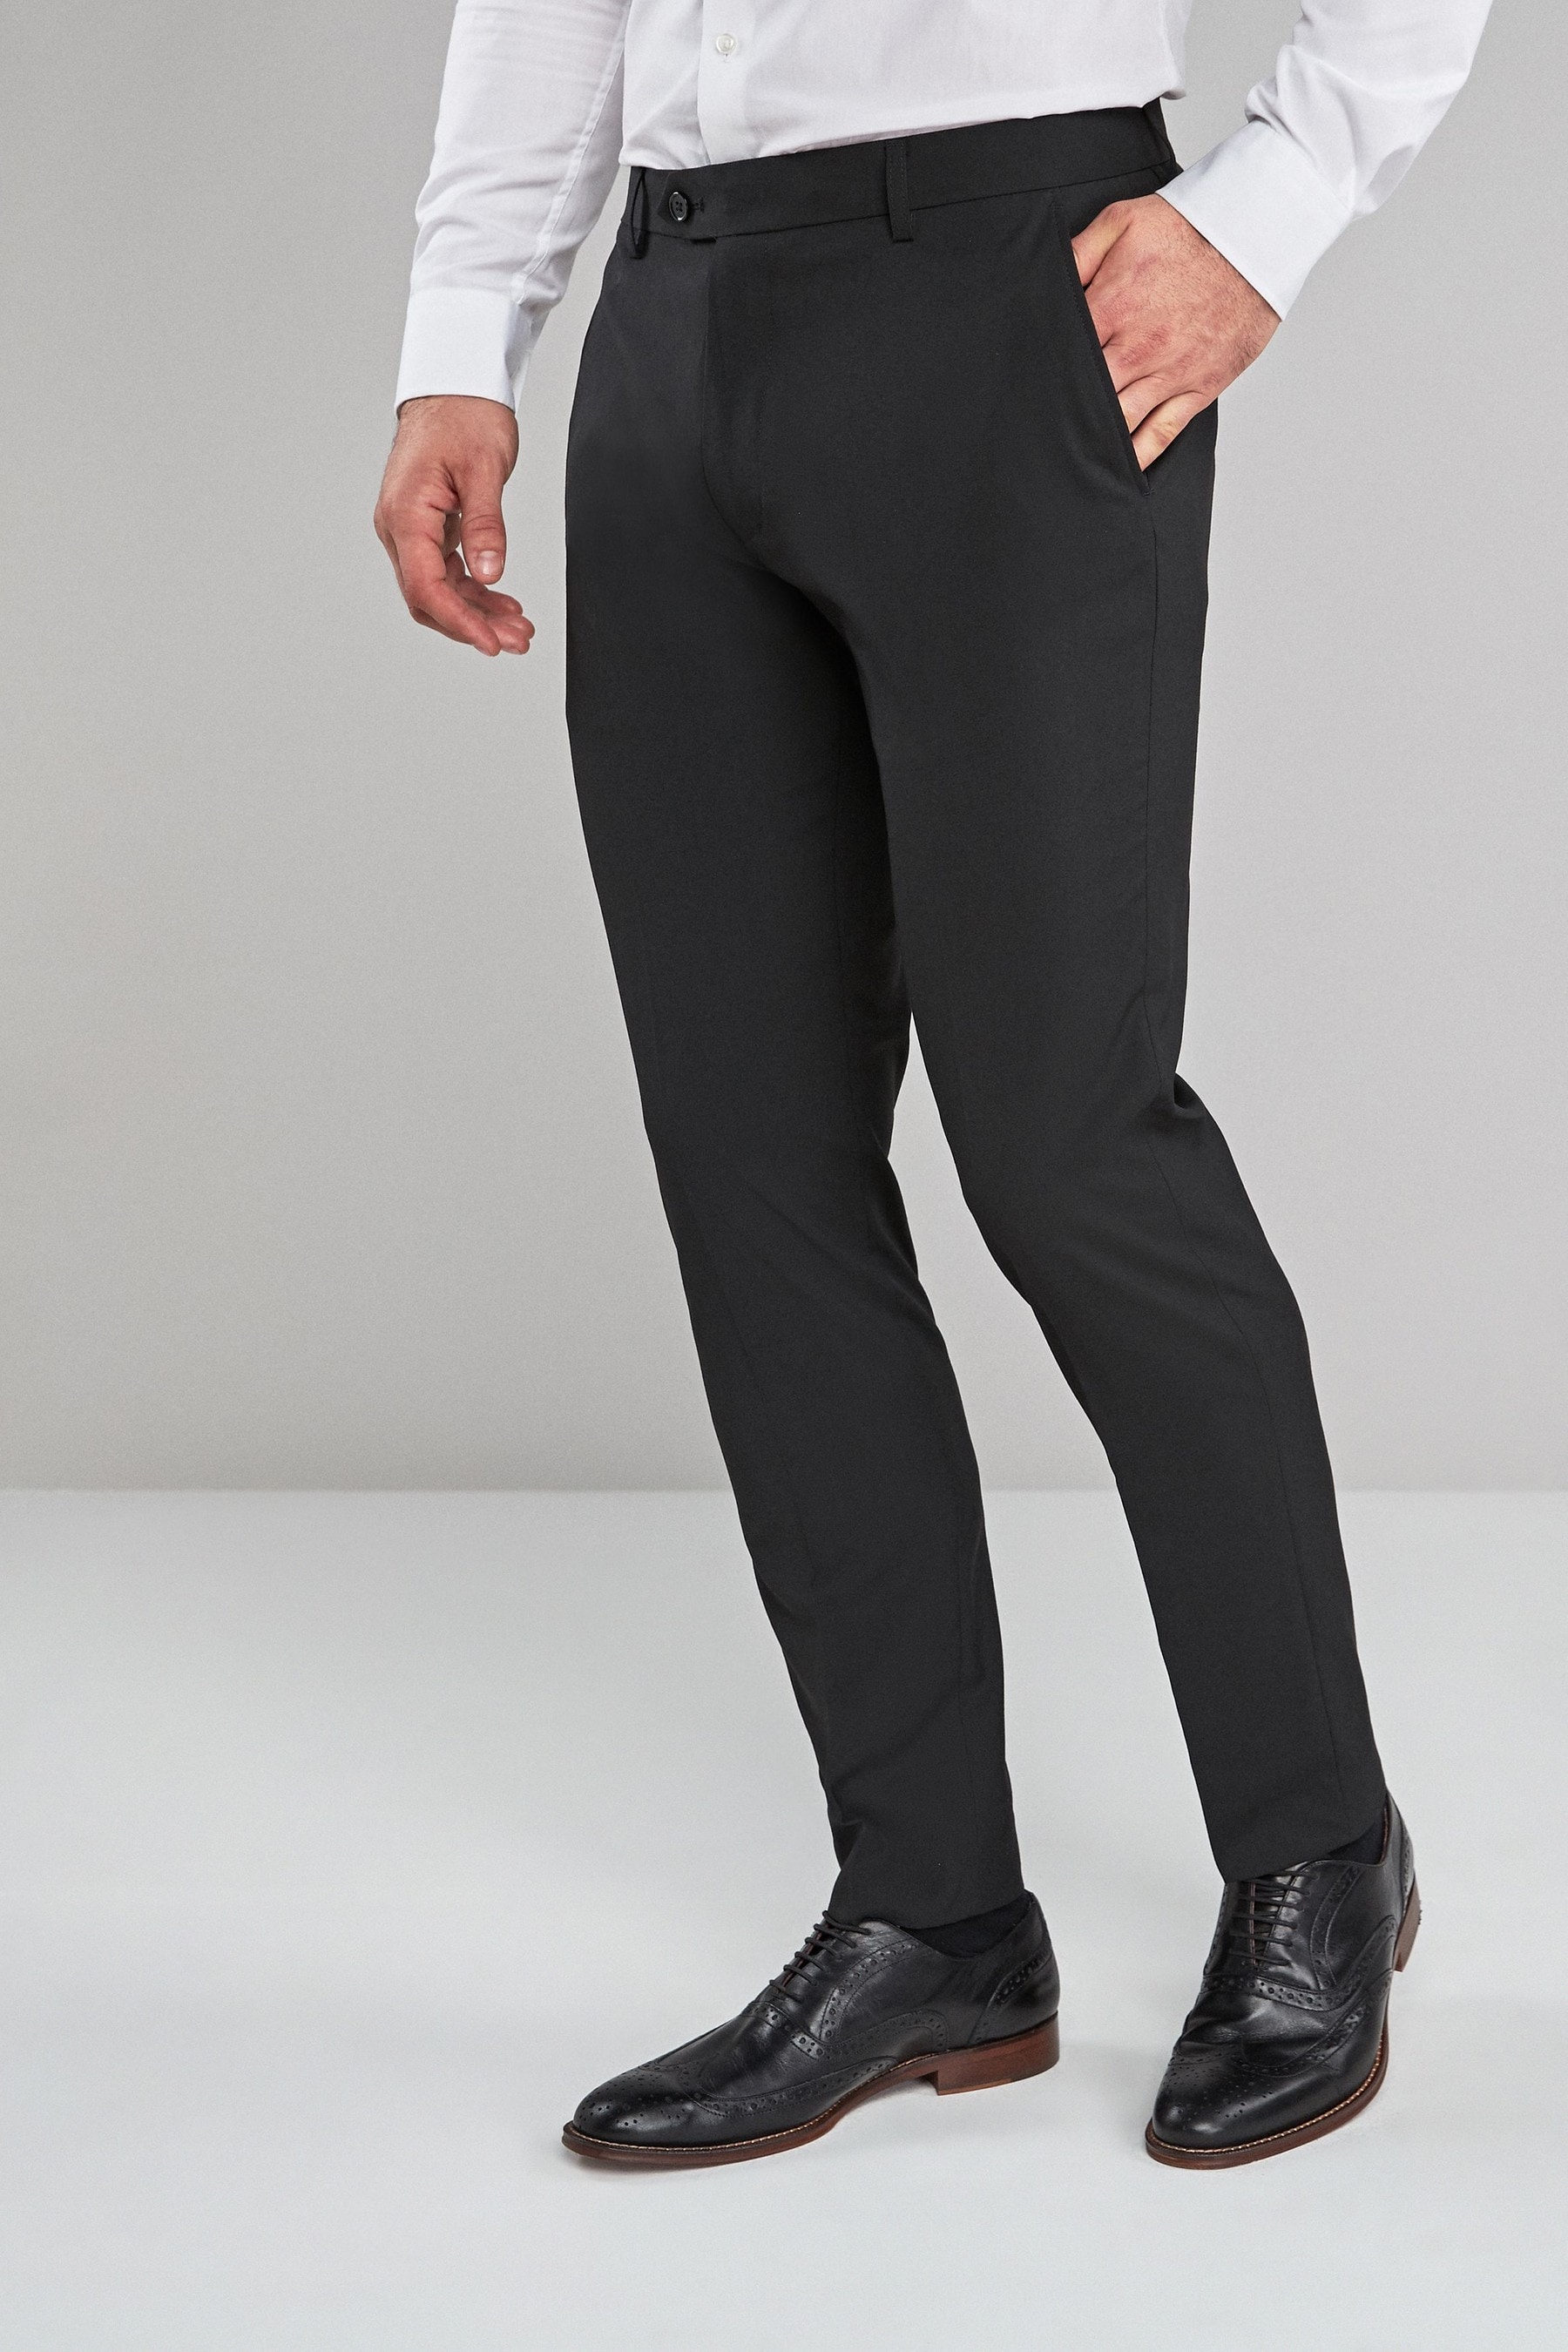 Men's Trousers | Suit Trousers | Tuxedo Trousers | Casual Trousers | Dobell